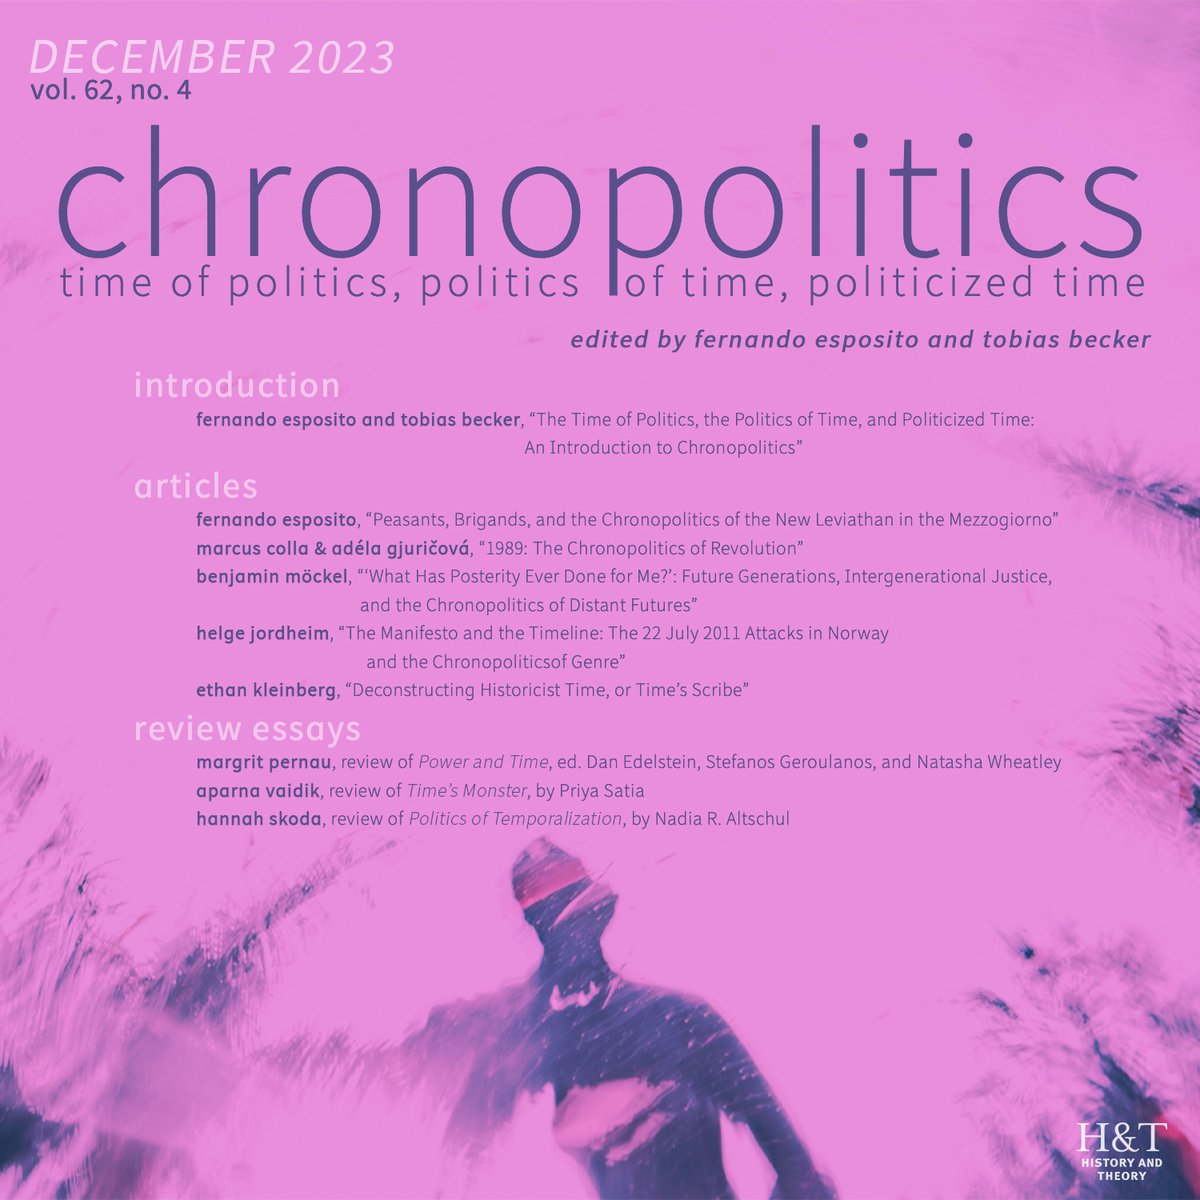 Our December 2023 issue is out now! 🎉 This theme issue, 'Chronopolitics: Time of Politics, Politics of Time, Politicized Time,' was edited by Fernando Esposito and Tobias Becker. Read it here: onlinelibrary.wiley.com/toc/14682303/2…